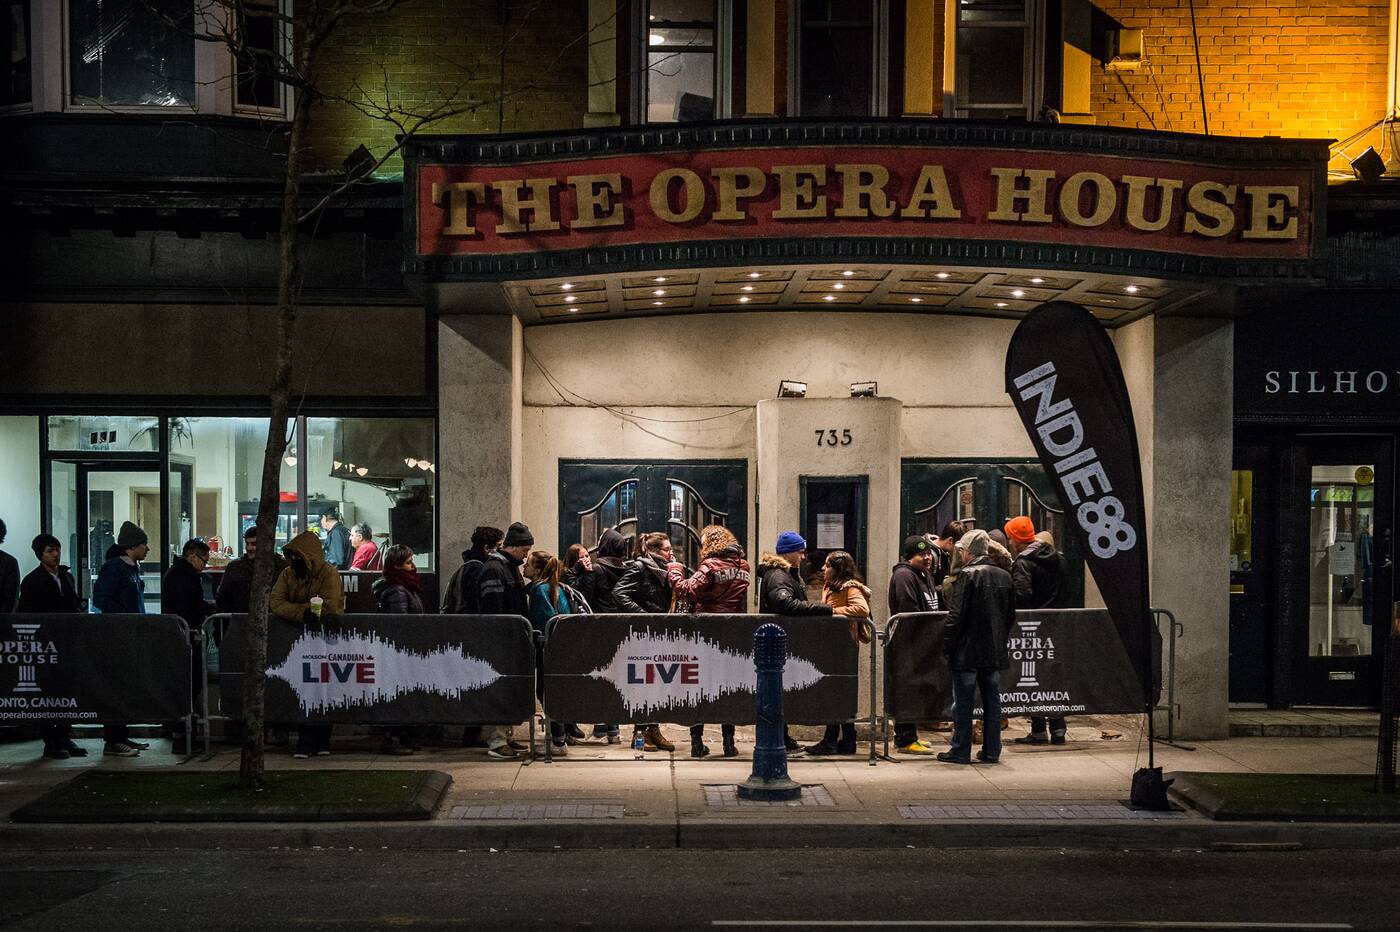 The history of the Opera House in Toronto